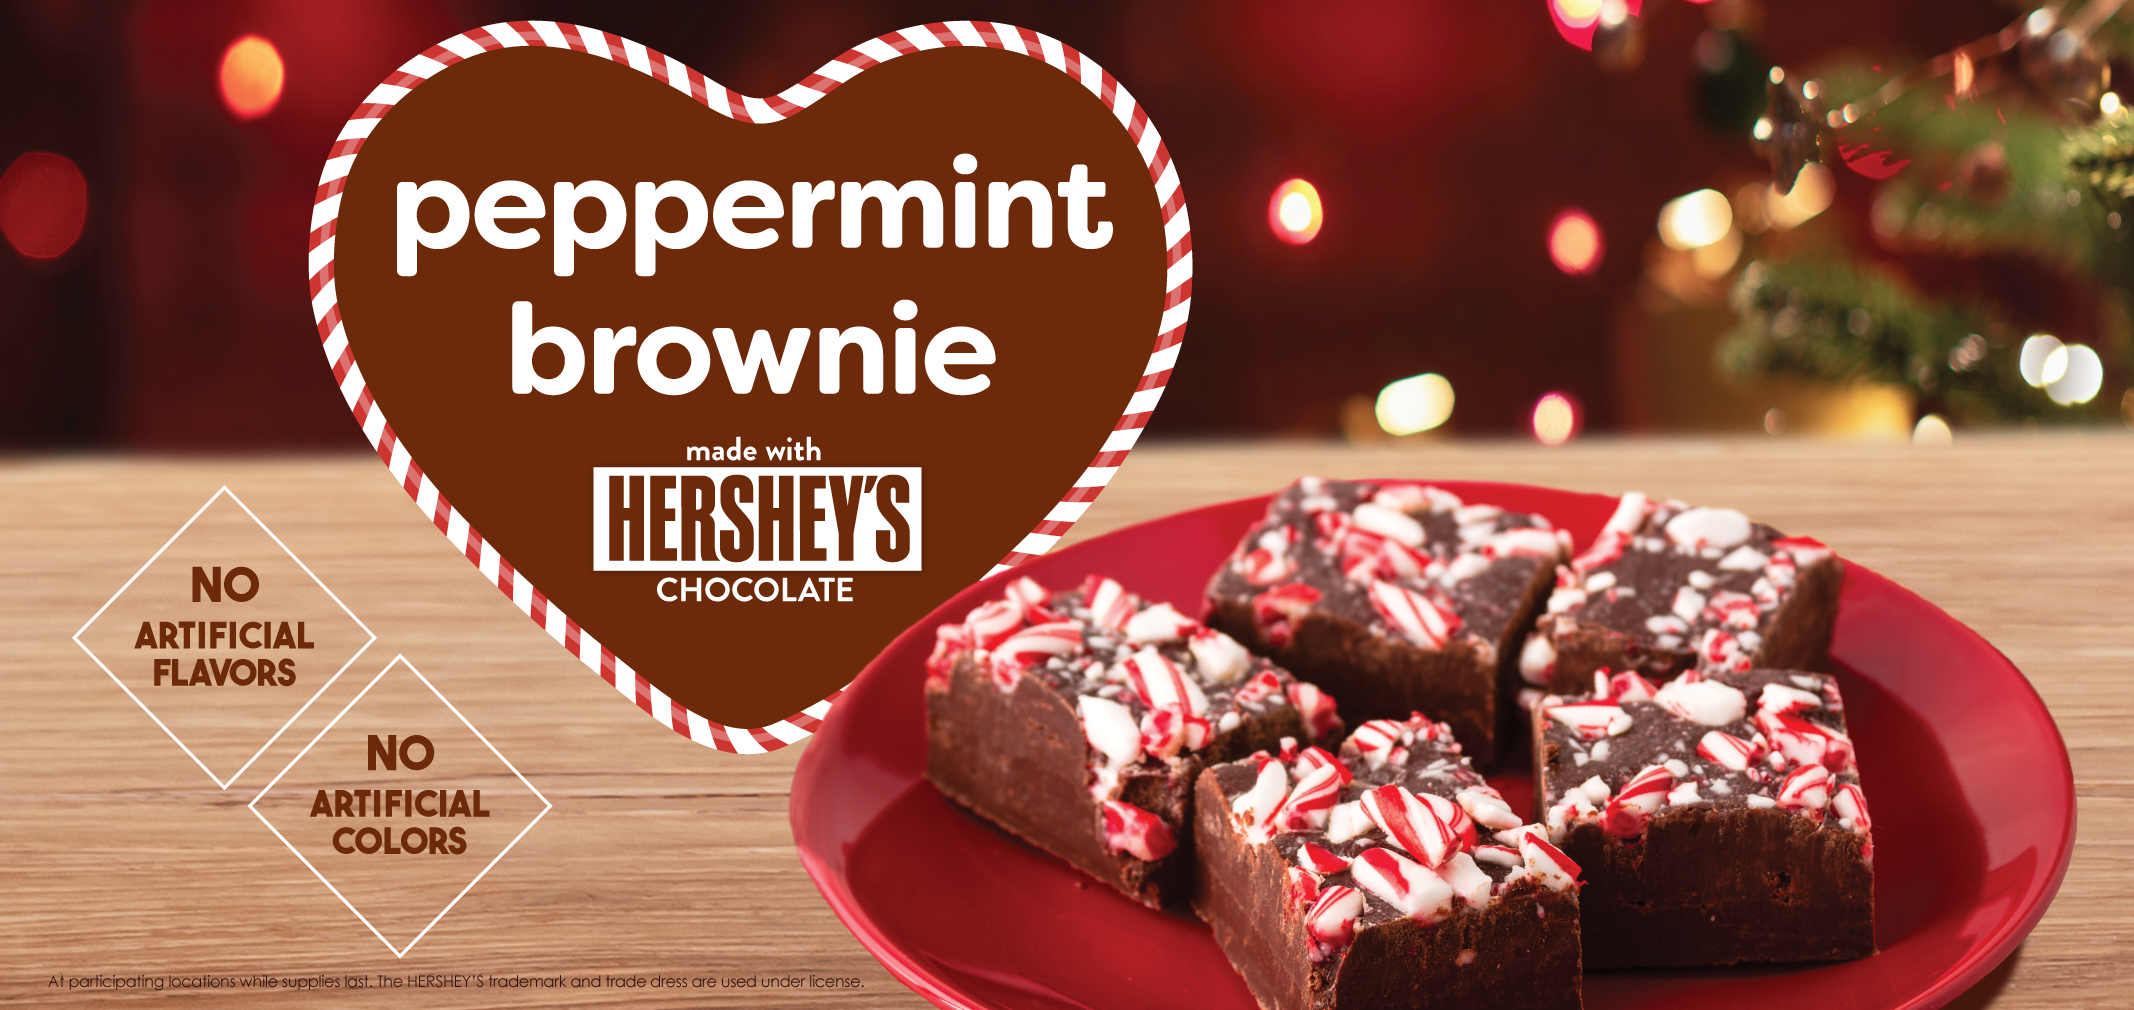 Peppermint Brownie made with Hershey's Chocolate label image